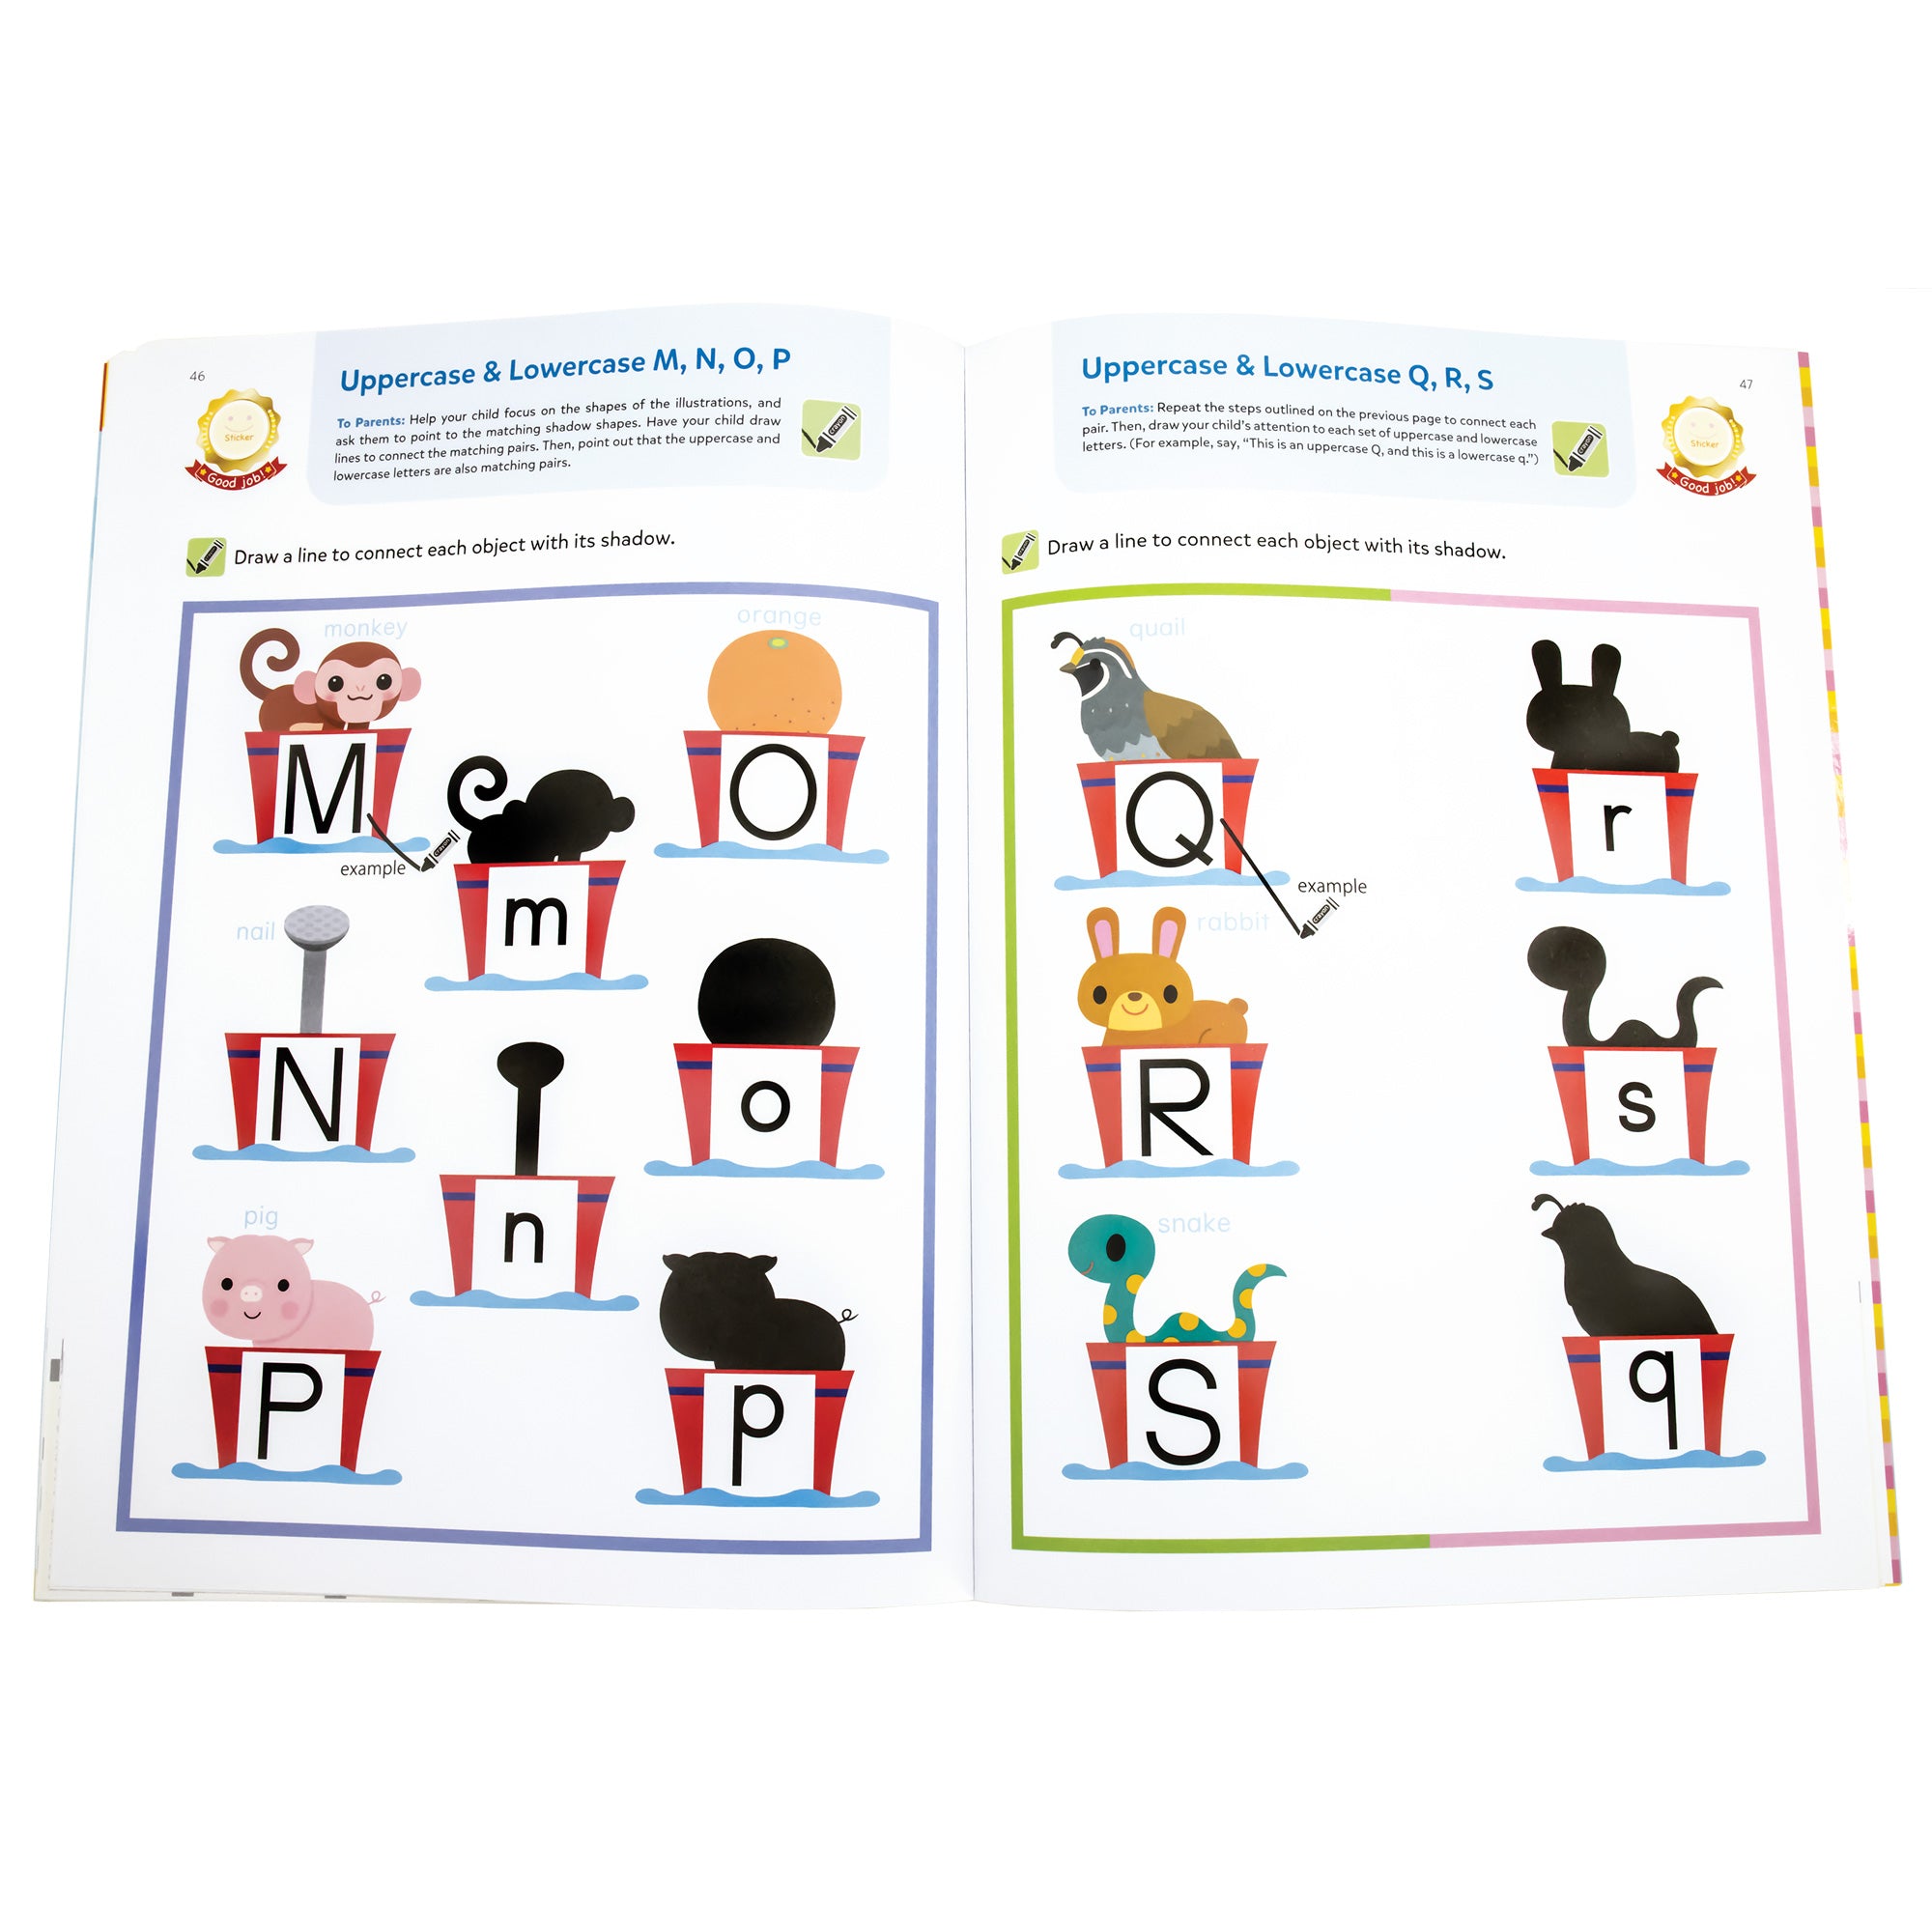 Play Smart Alphabet book open to show upper and lowercase letters that you will match. On the left page , you are matching letters m, n, o, and p. On the right page you are matching letters q, r, and s. Both pages show buckets floating in water with an object in each bucket. There are also matching silhouettes of each object nearby. You are directed to draw a line from the seen object, to the silhouette object.